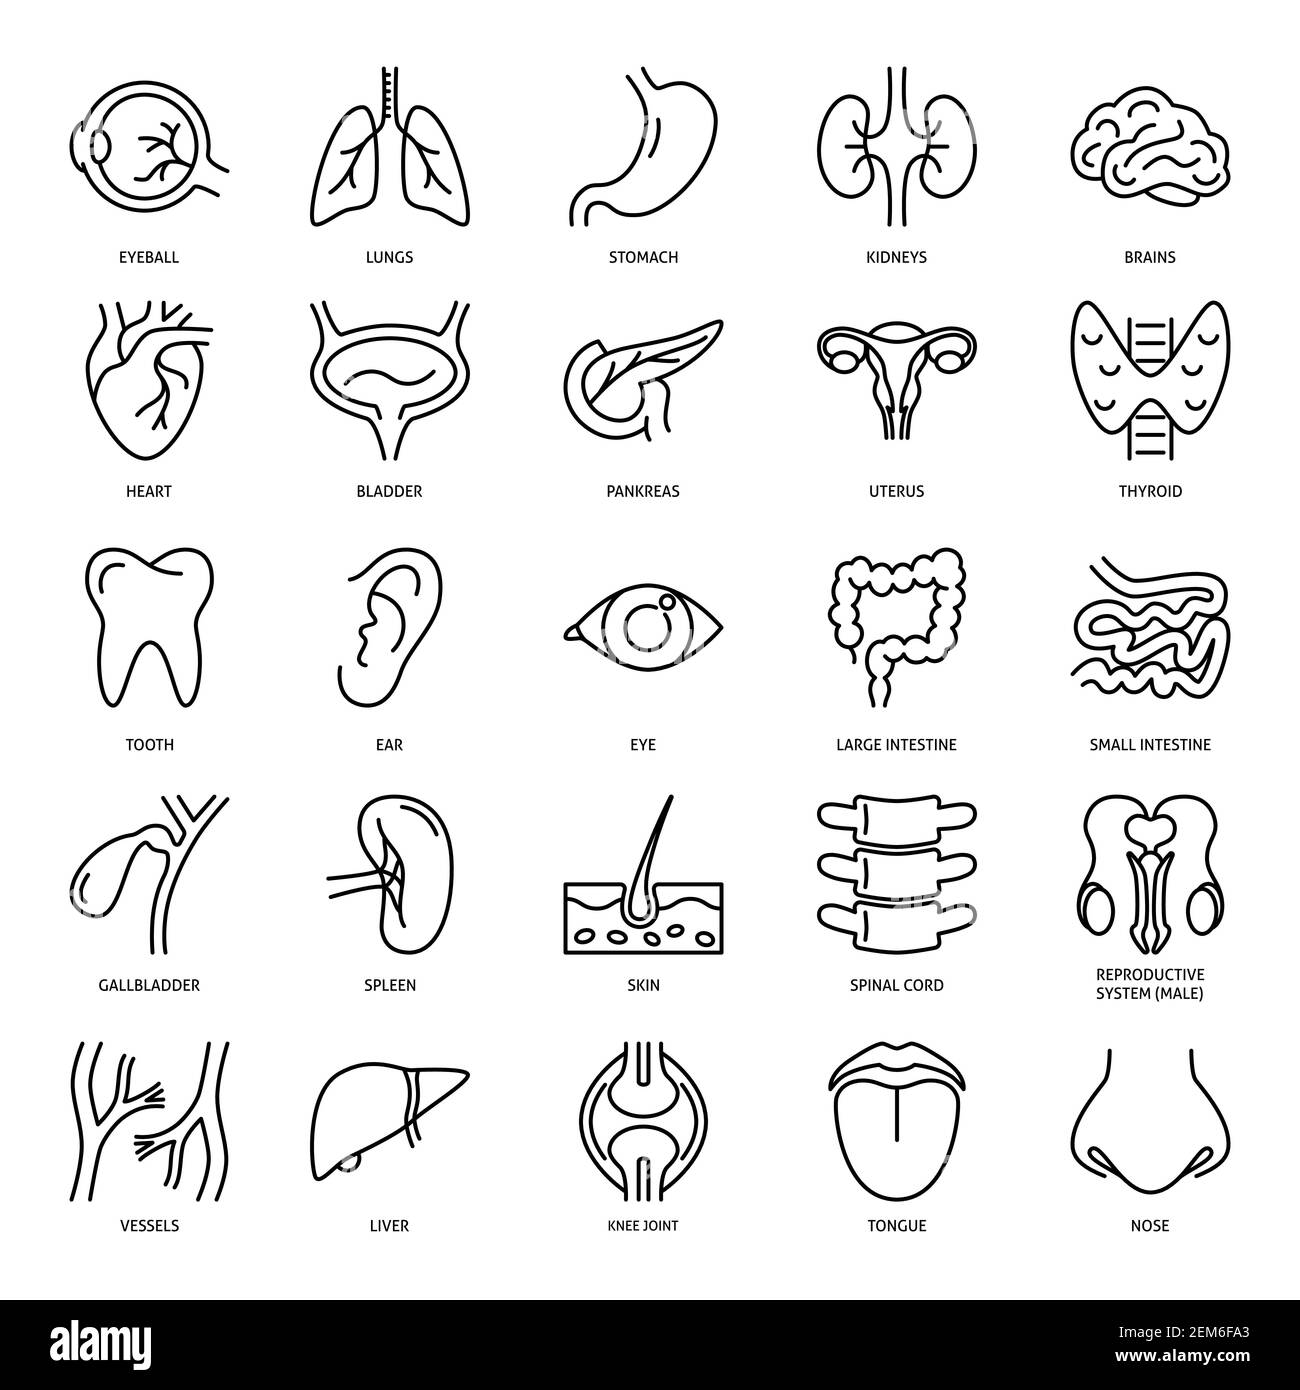 Human internal organs icon set in line style. Medical anatomy symbols collection isolated on white background. Vector illustration. Stock Vector